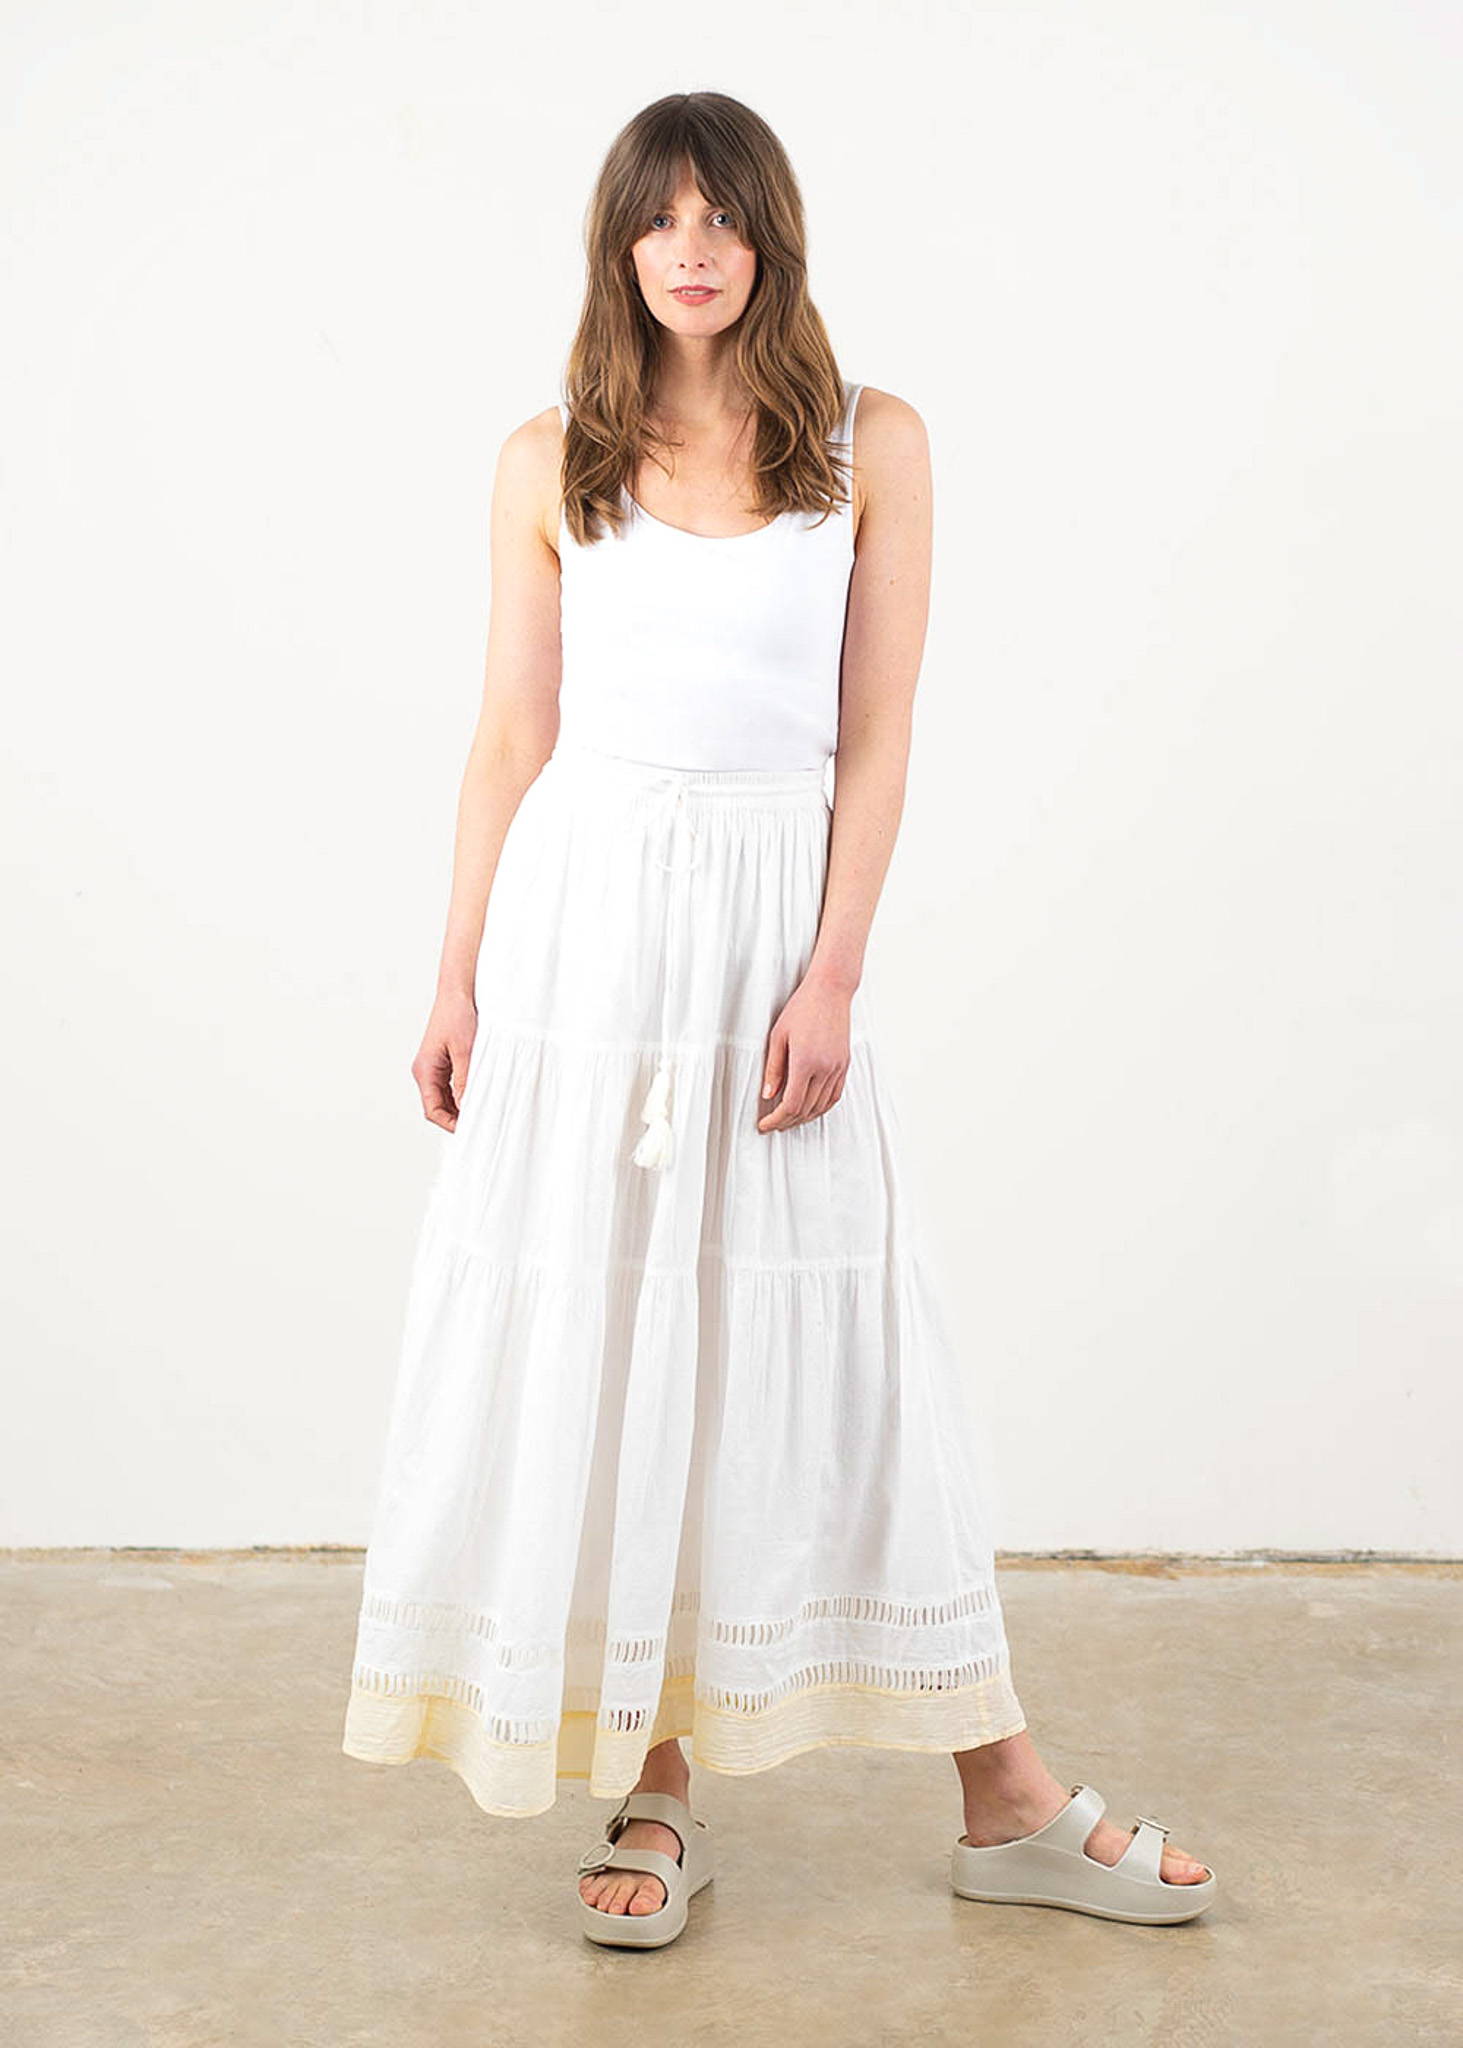 A model wearing a white sleeveless vest with a long white maxi skirt with tiered detail and a yellow panel at the hem and off white platform slides.